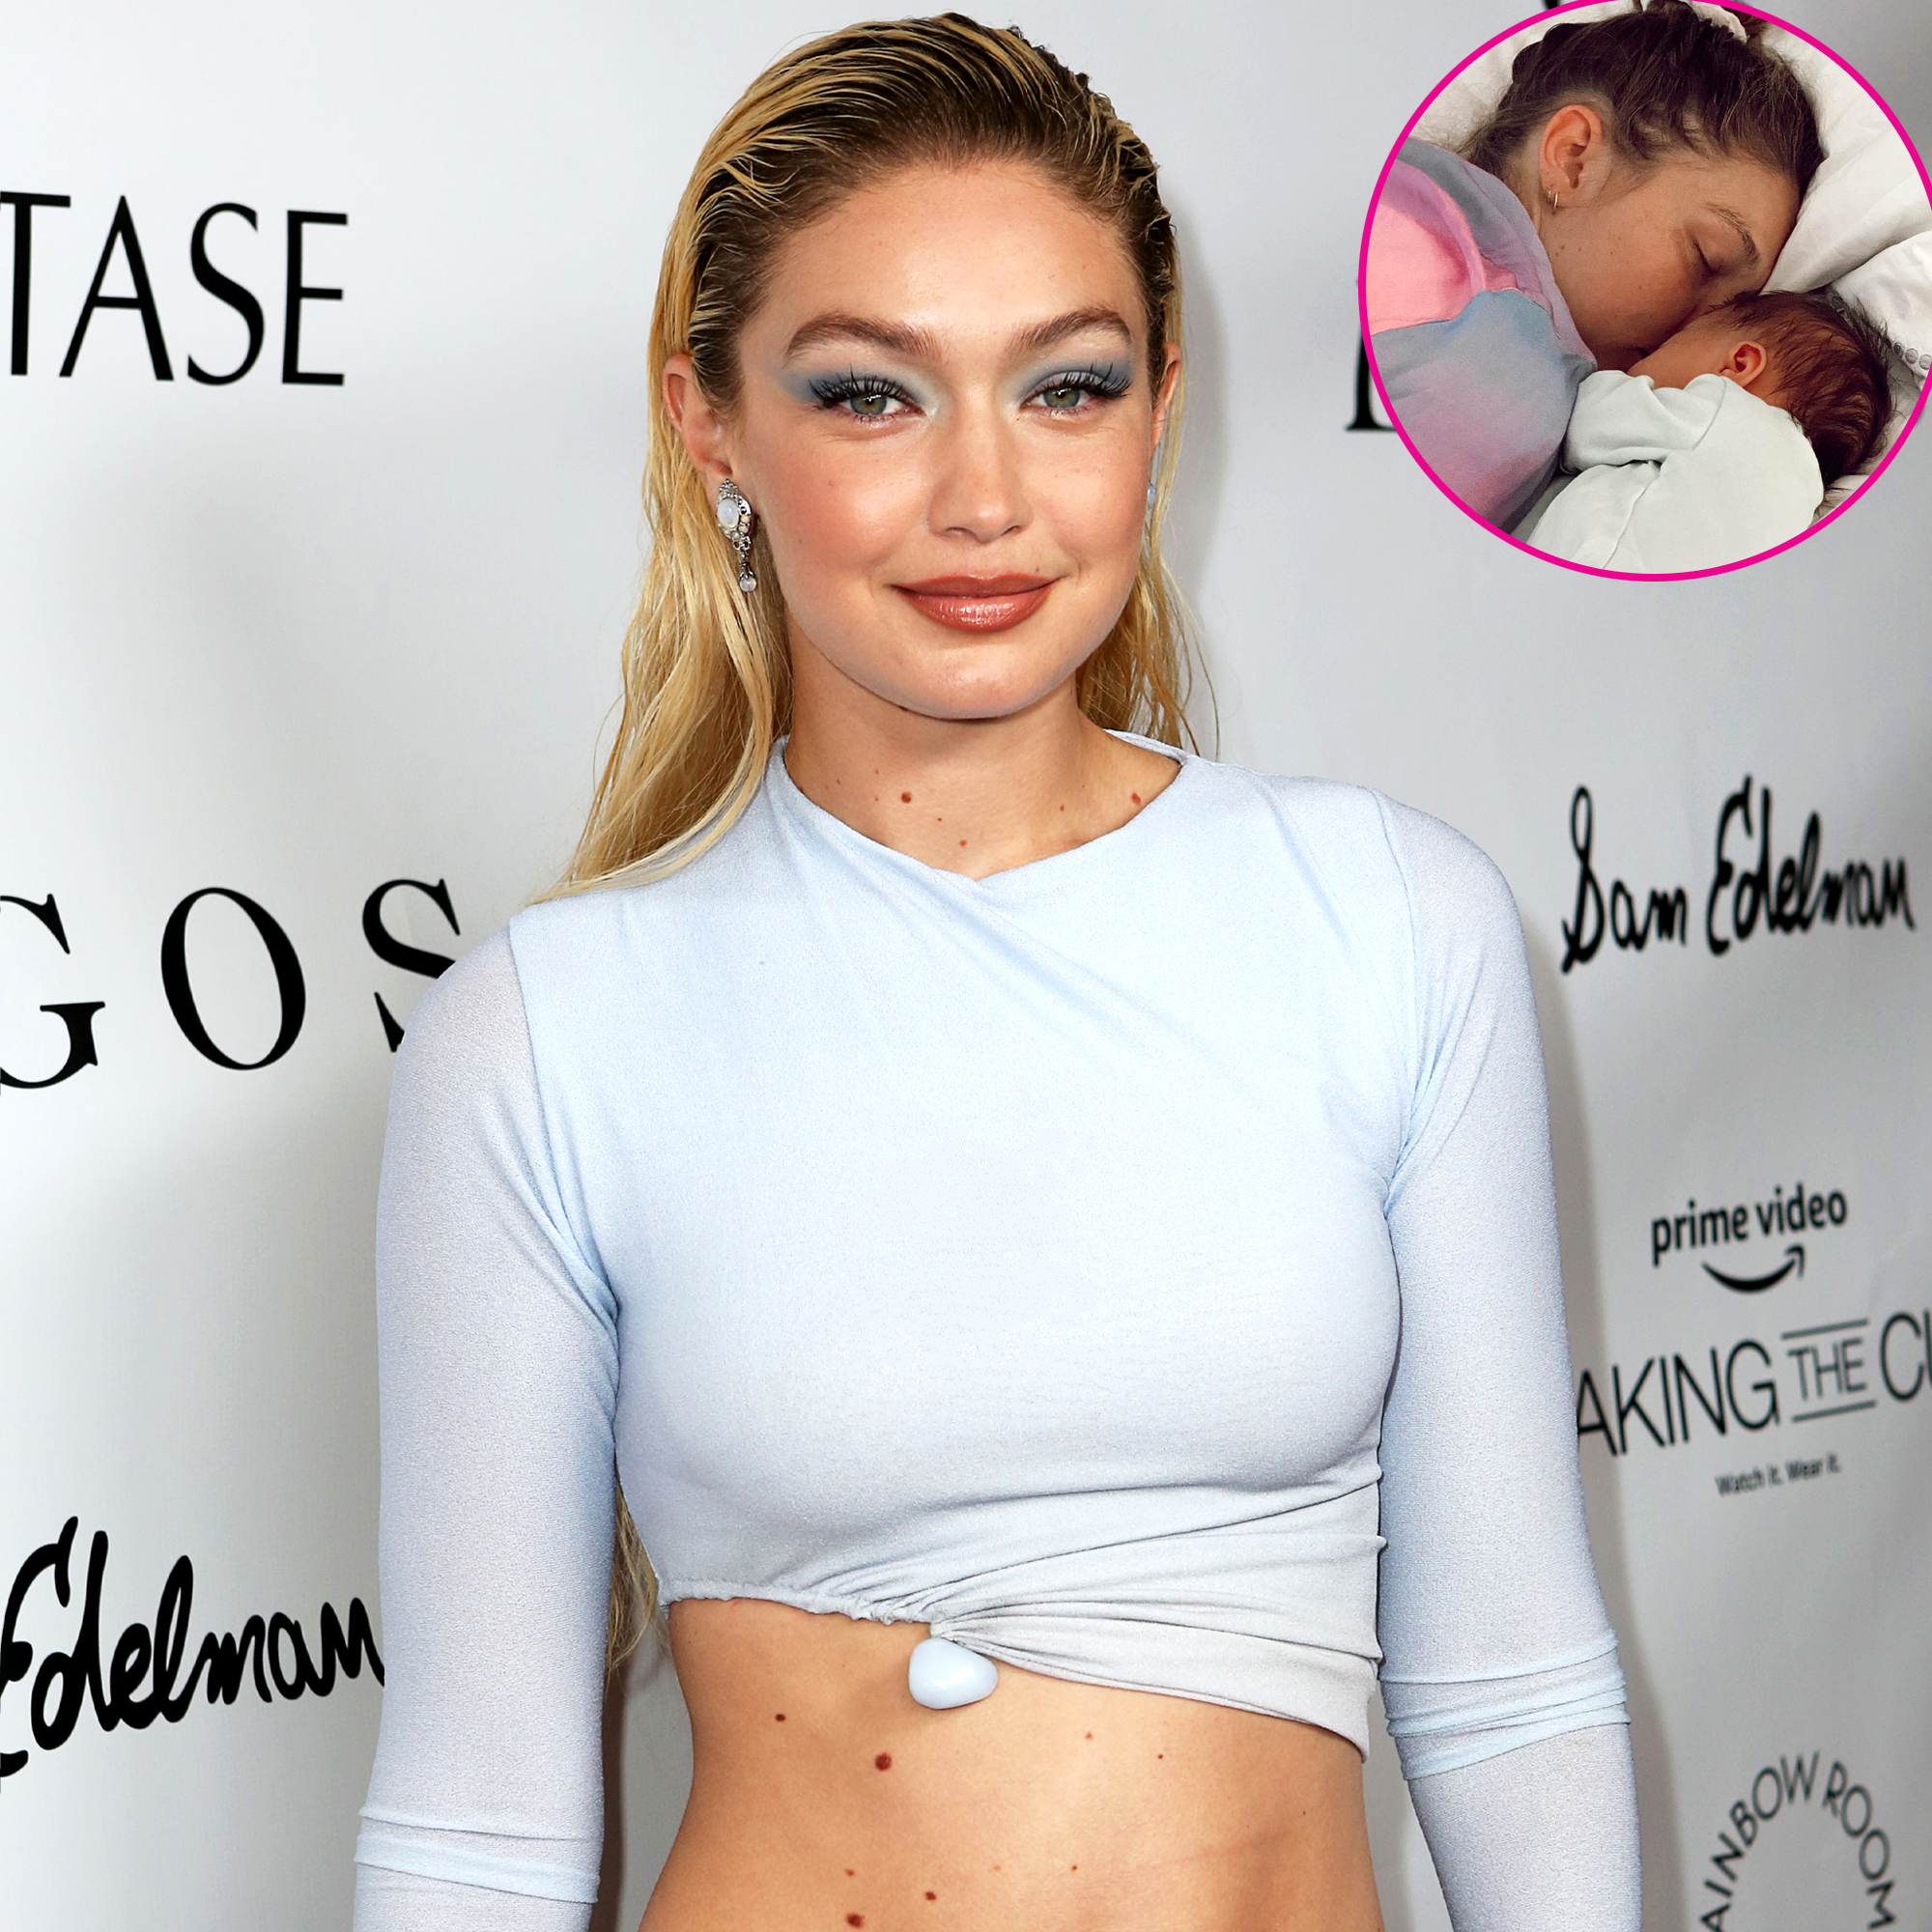 https://www.usmagazine.com/wp-content/uploads/2023/01/Gigi-Hadid-Shares-Rare-Photo-of-Daughter-Khai-on-New-Years-Eve-Feature.jpg?quality=86&strip=all